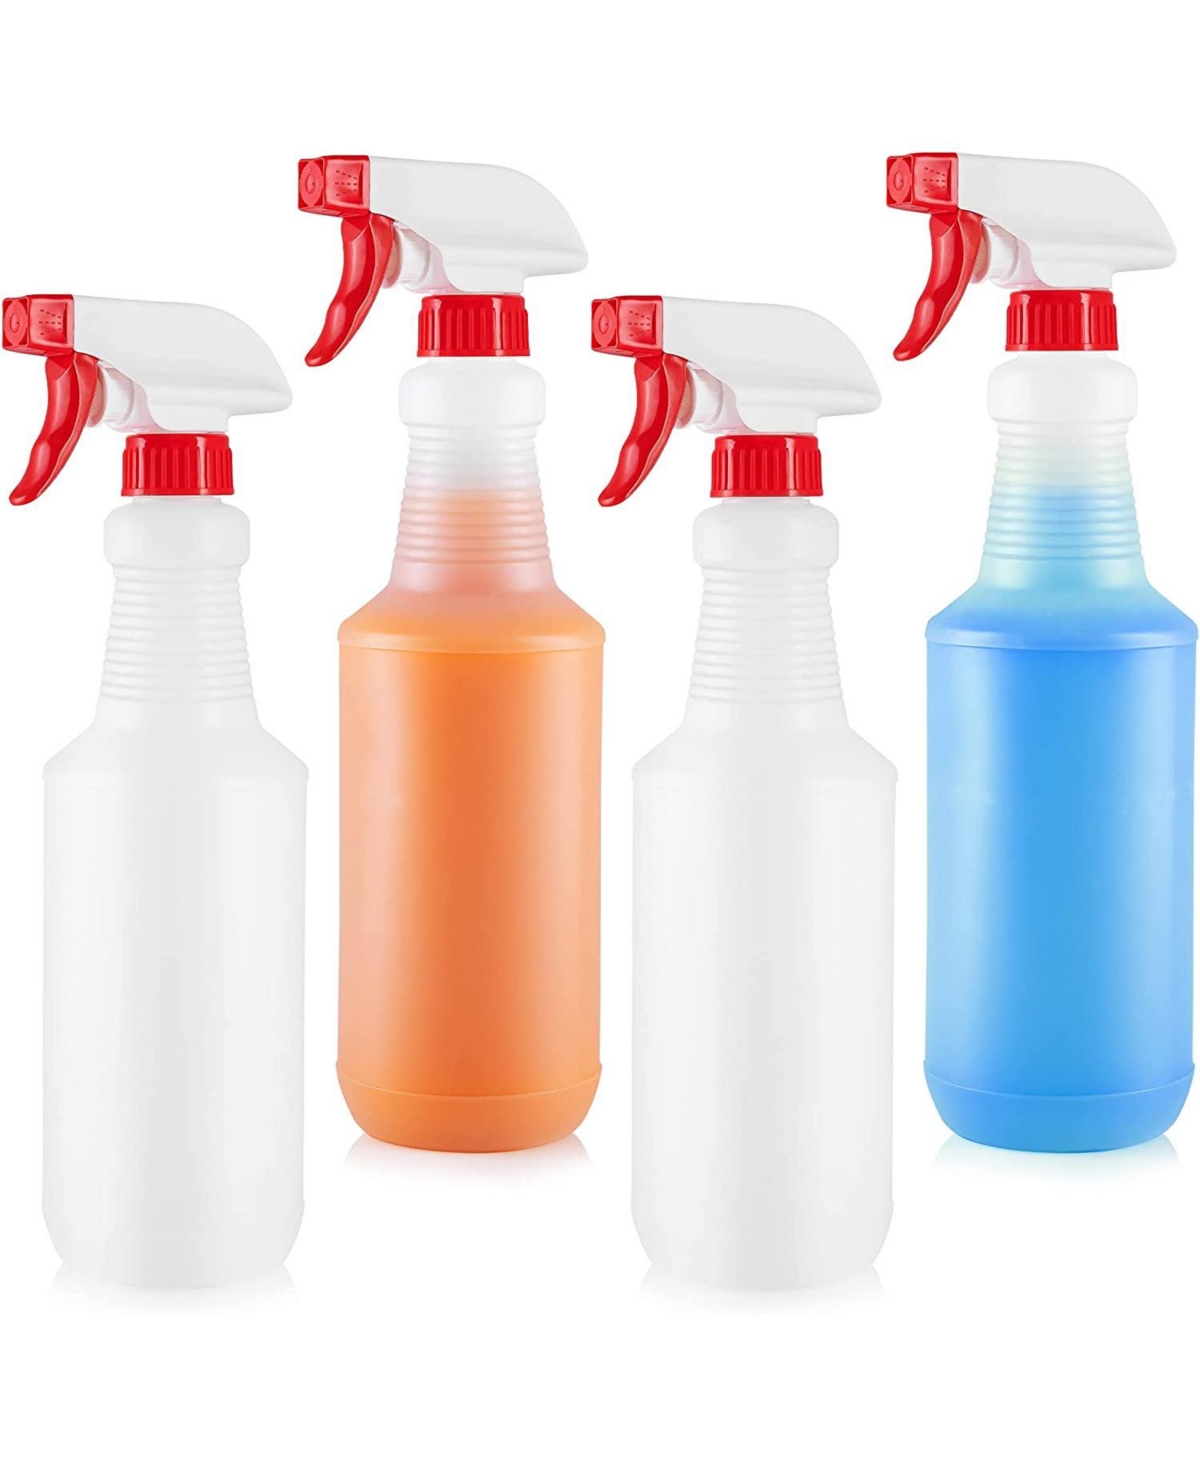 4 Pc. Cleaning Spray Bottles With Adjustable Nozzle & Spring Loaded Trigger - White